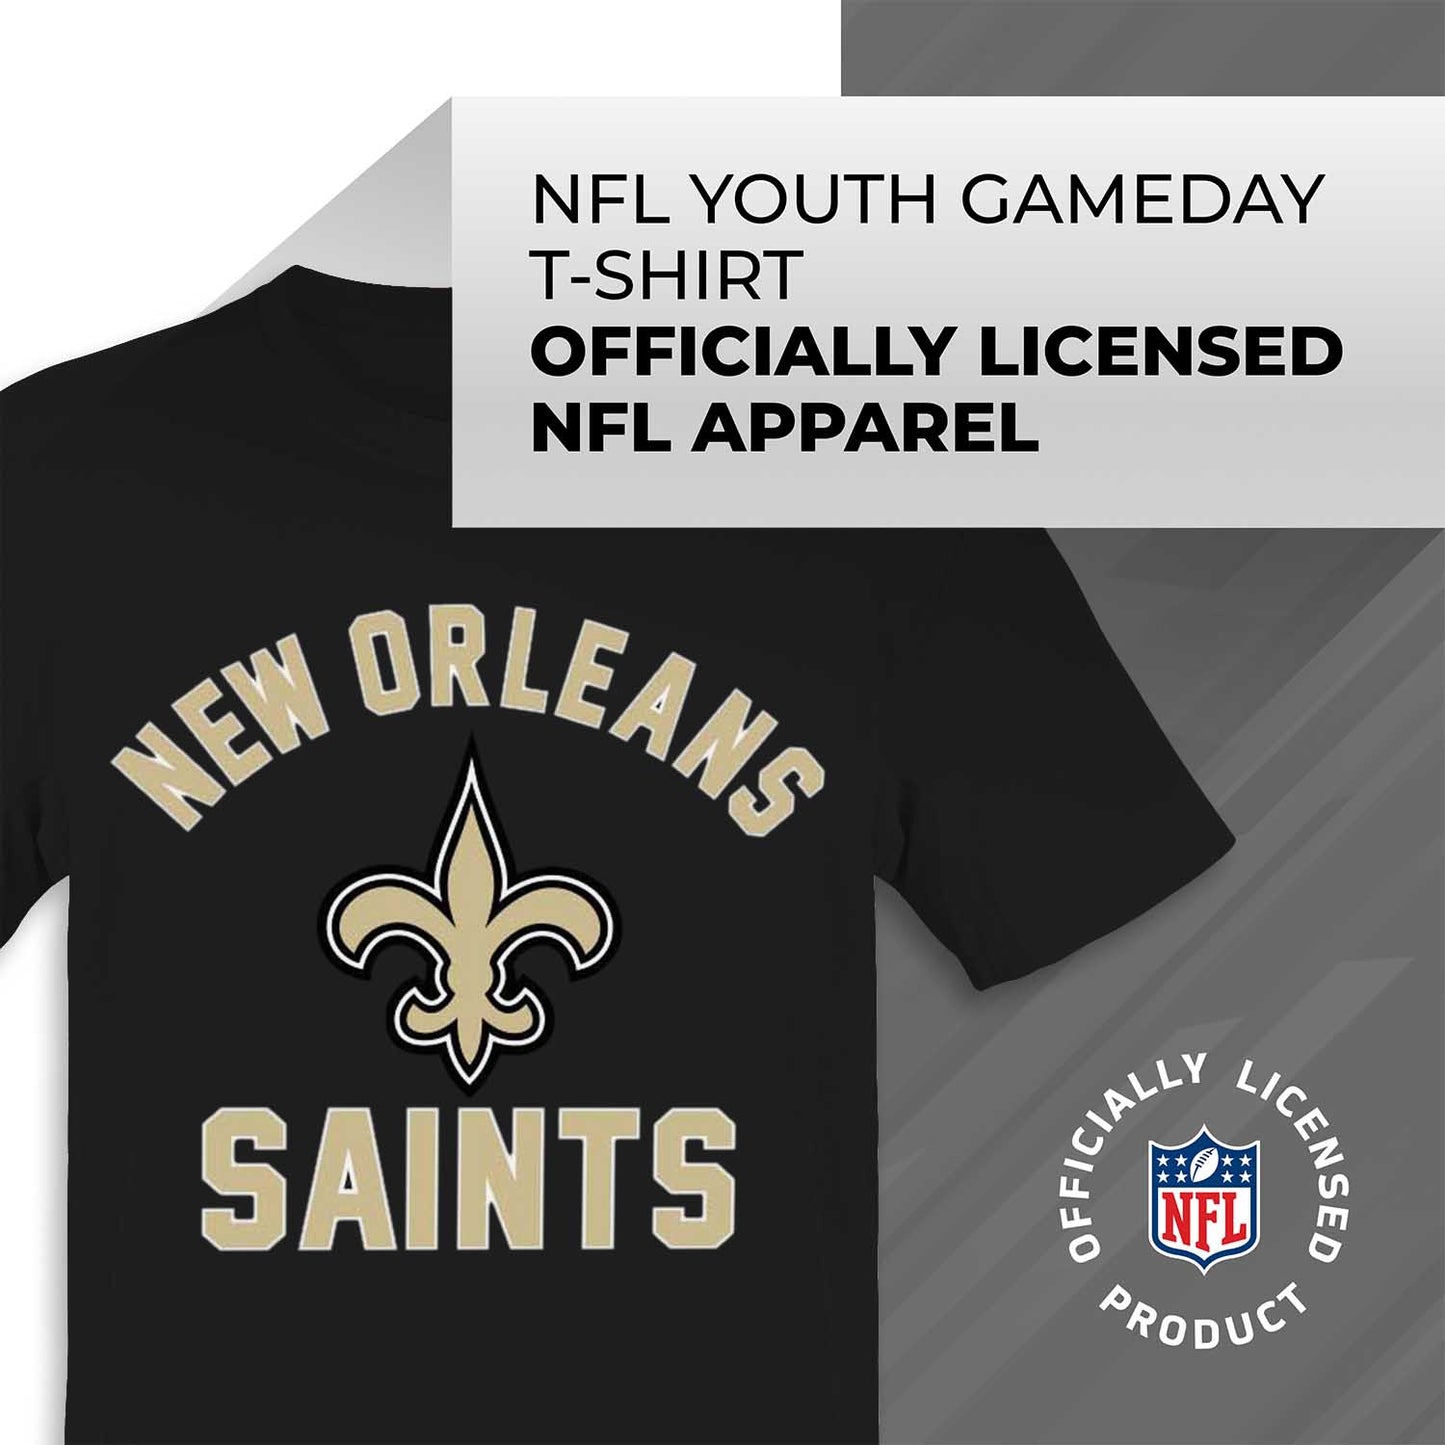 New Orleans Saints NFL Youth Gameday Football T-Shirt - Black